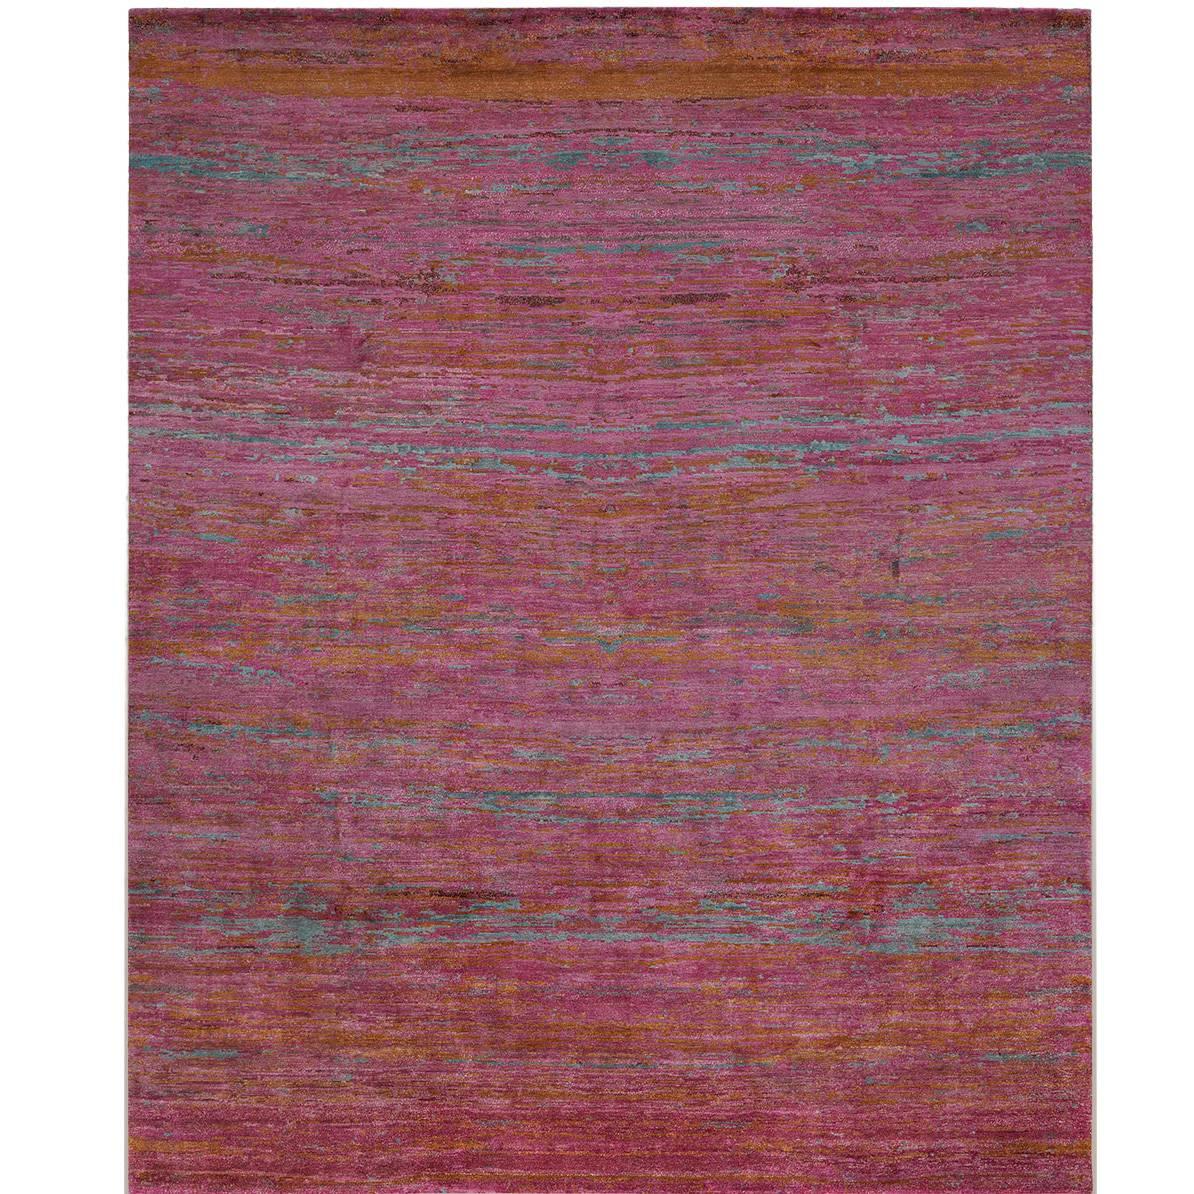 Pink Radi from Radi Deluxe Carpet Collection by Jan Kath For Sale